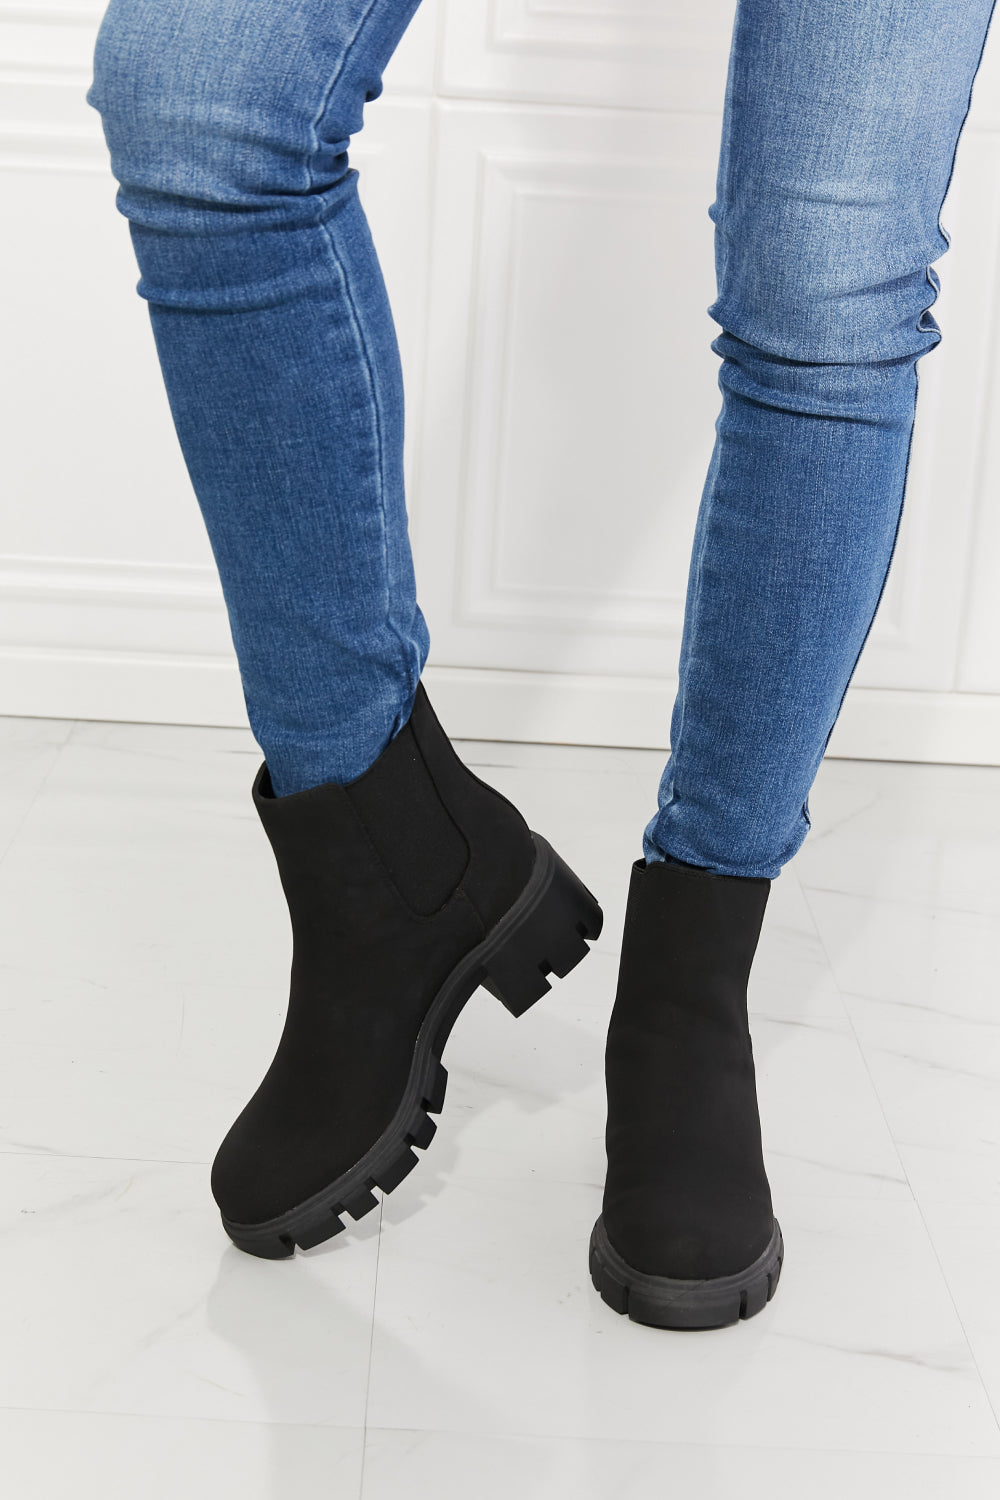 Matte Lug Sole Chelsea Boots in Black Shoes RYSE Clothing Co. Black 6 